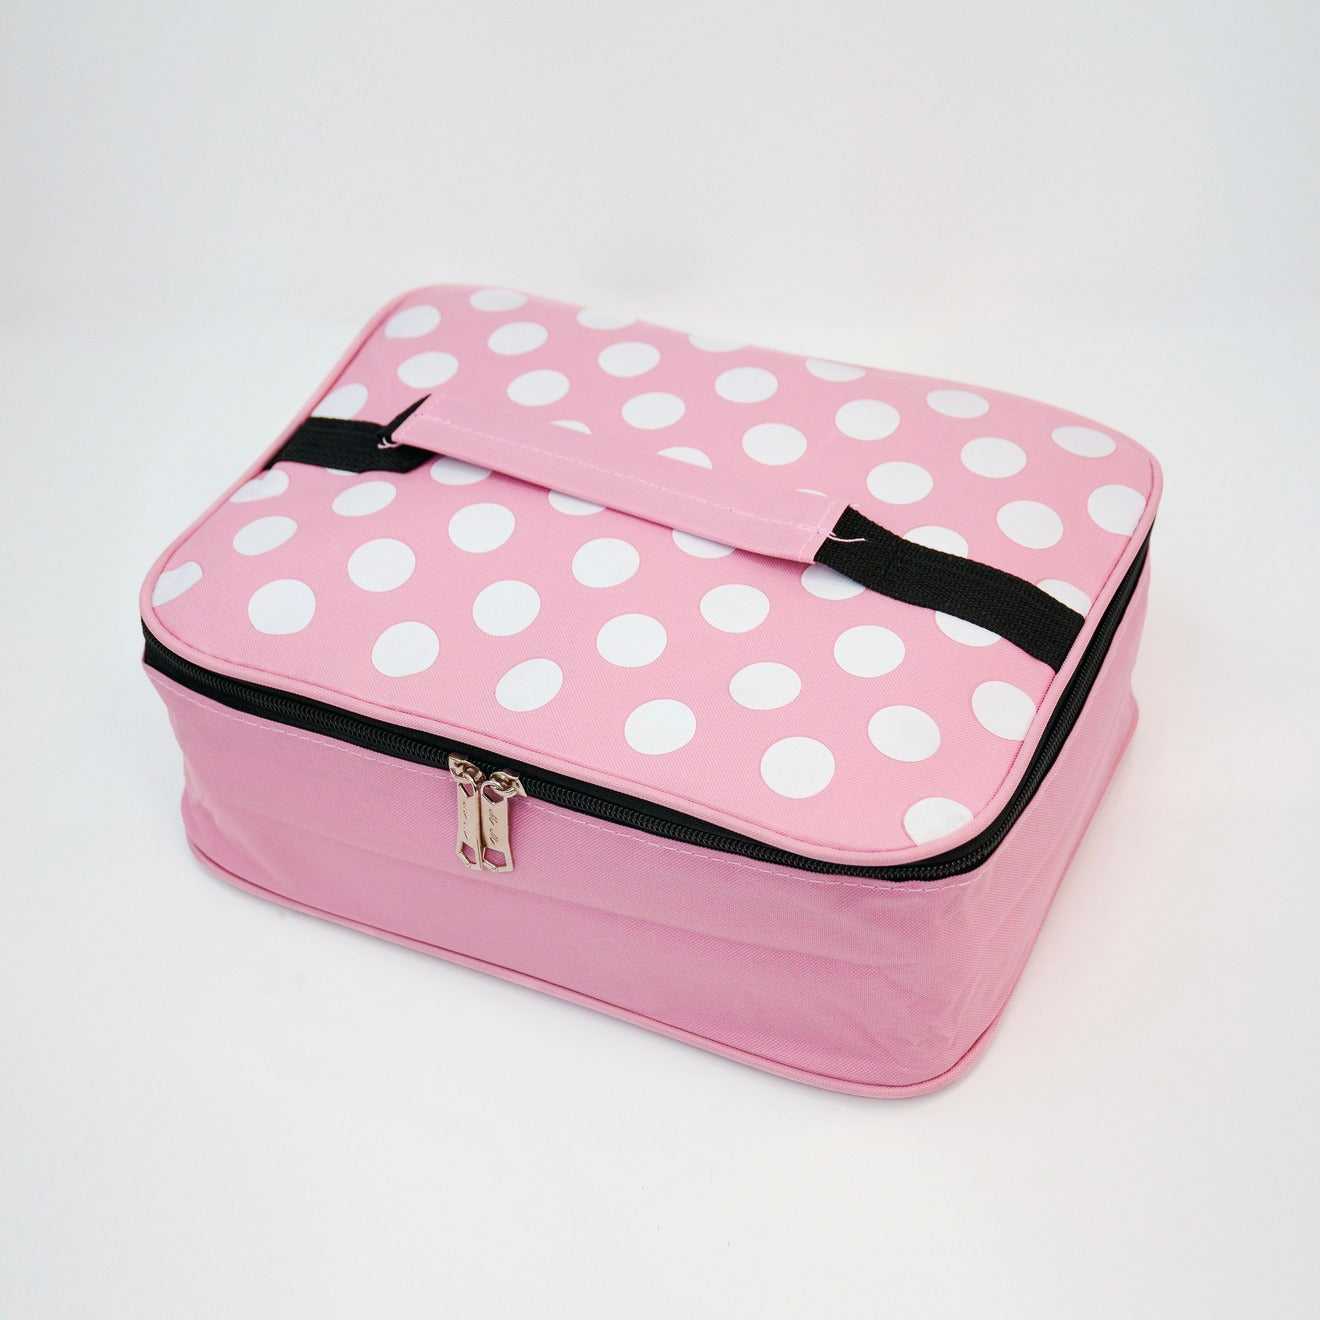 Polka Dotted Insulated Square Lunch Bag Zaappy.com